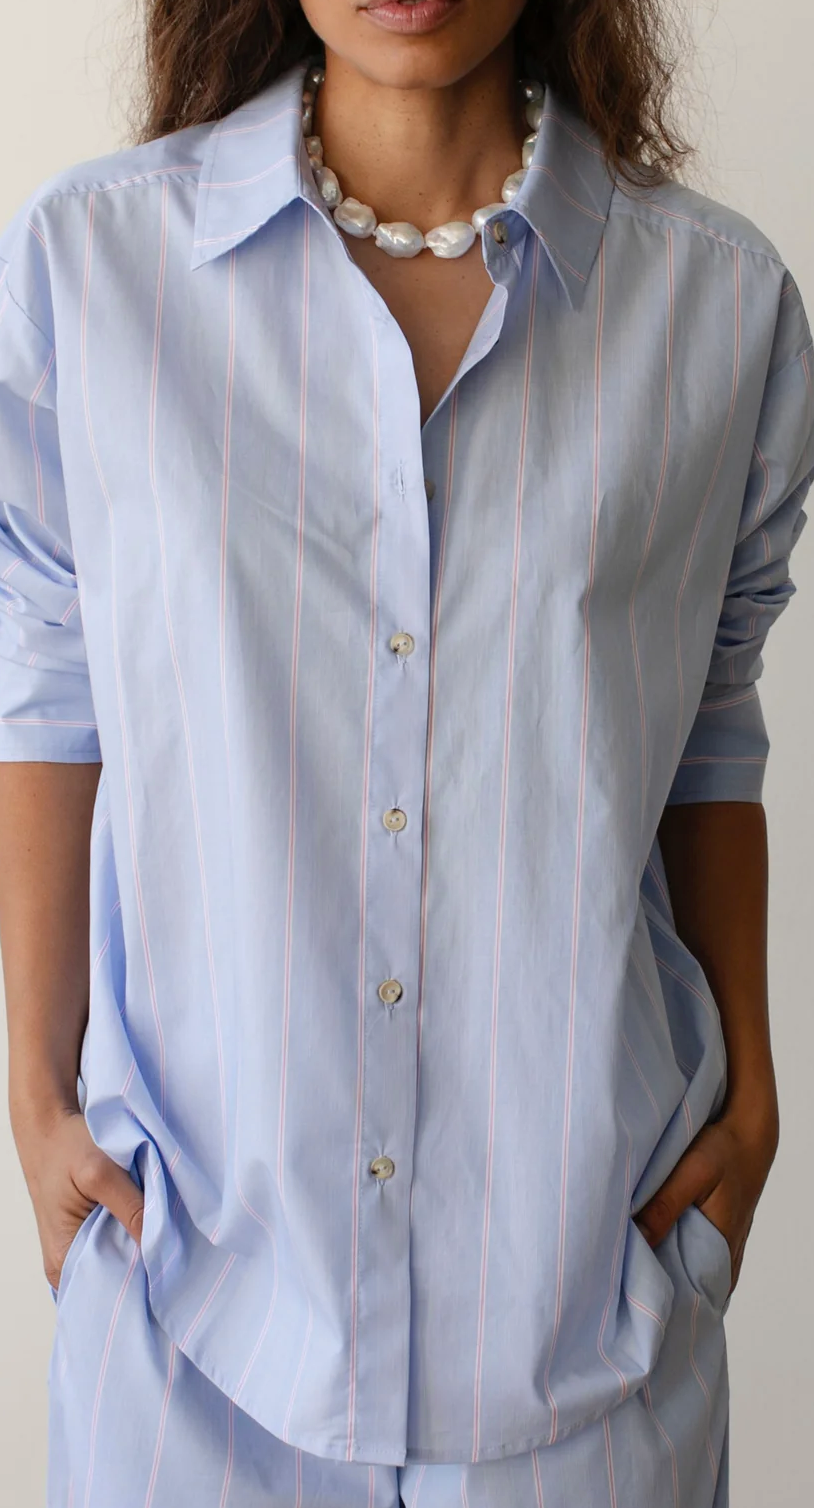 A woman wearing a light blue striped Donni Stripe Pop Shirt with hands on hips. She has a chunky white necklace and the shirt features vertical stripes and wooden buttons.